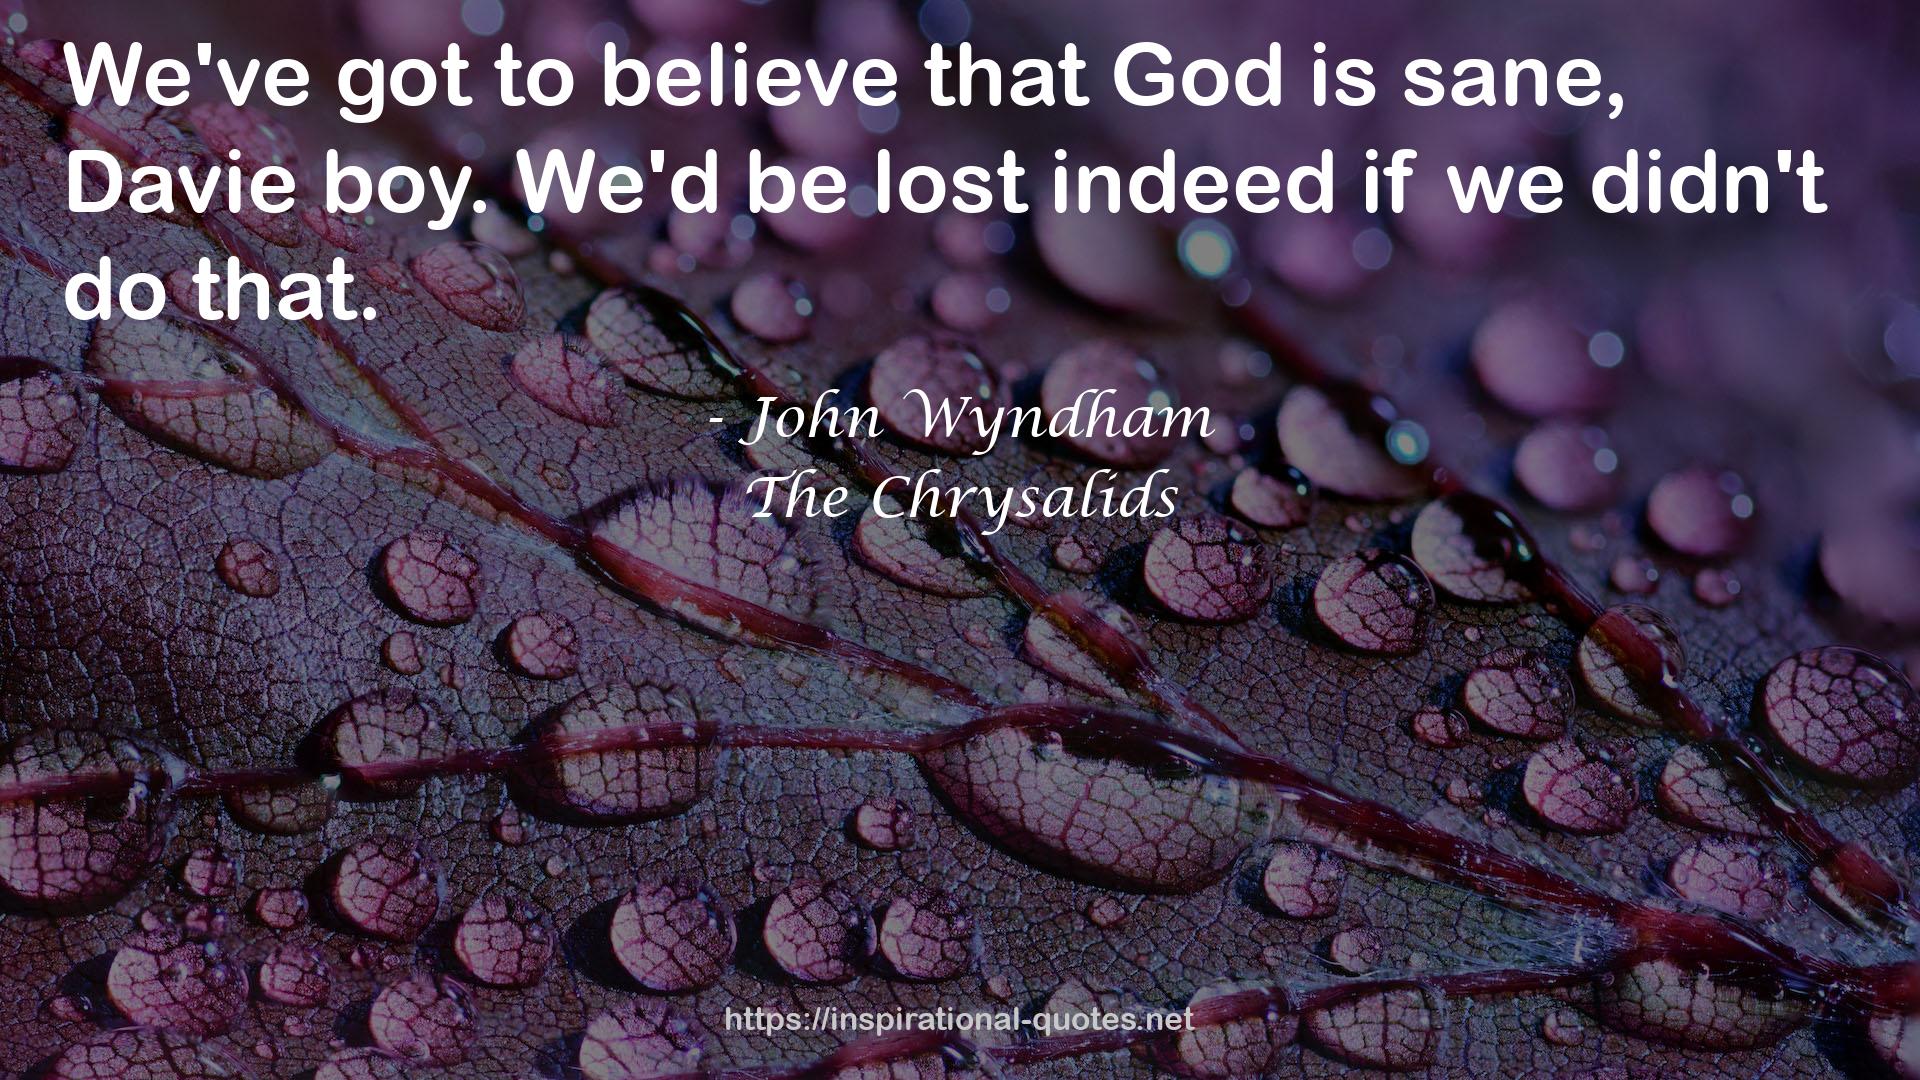 The Chrysalids QUOTES